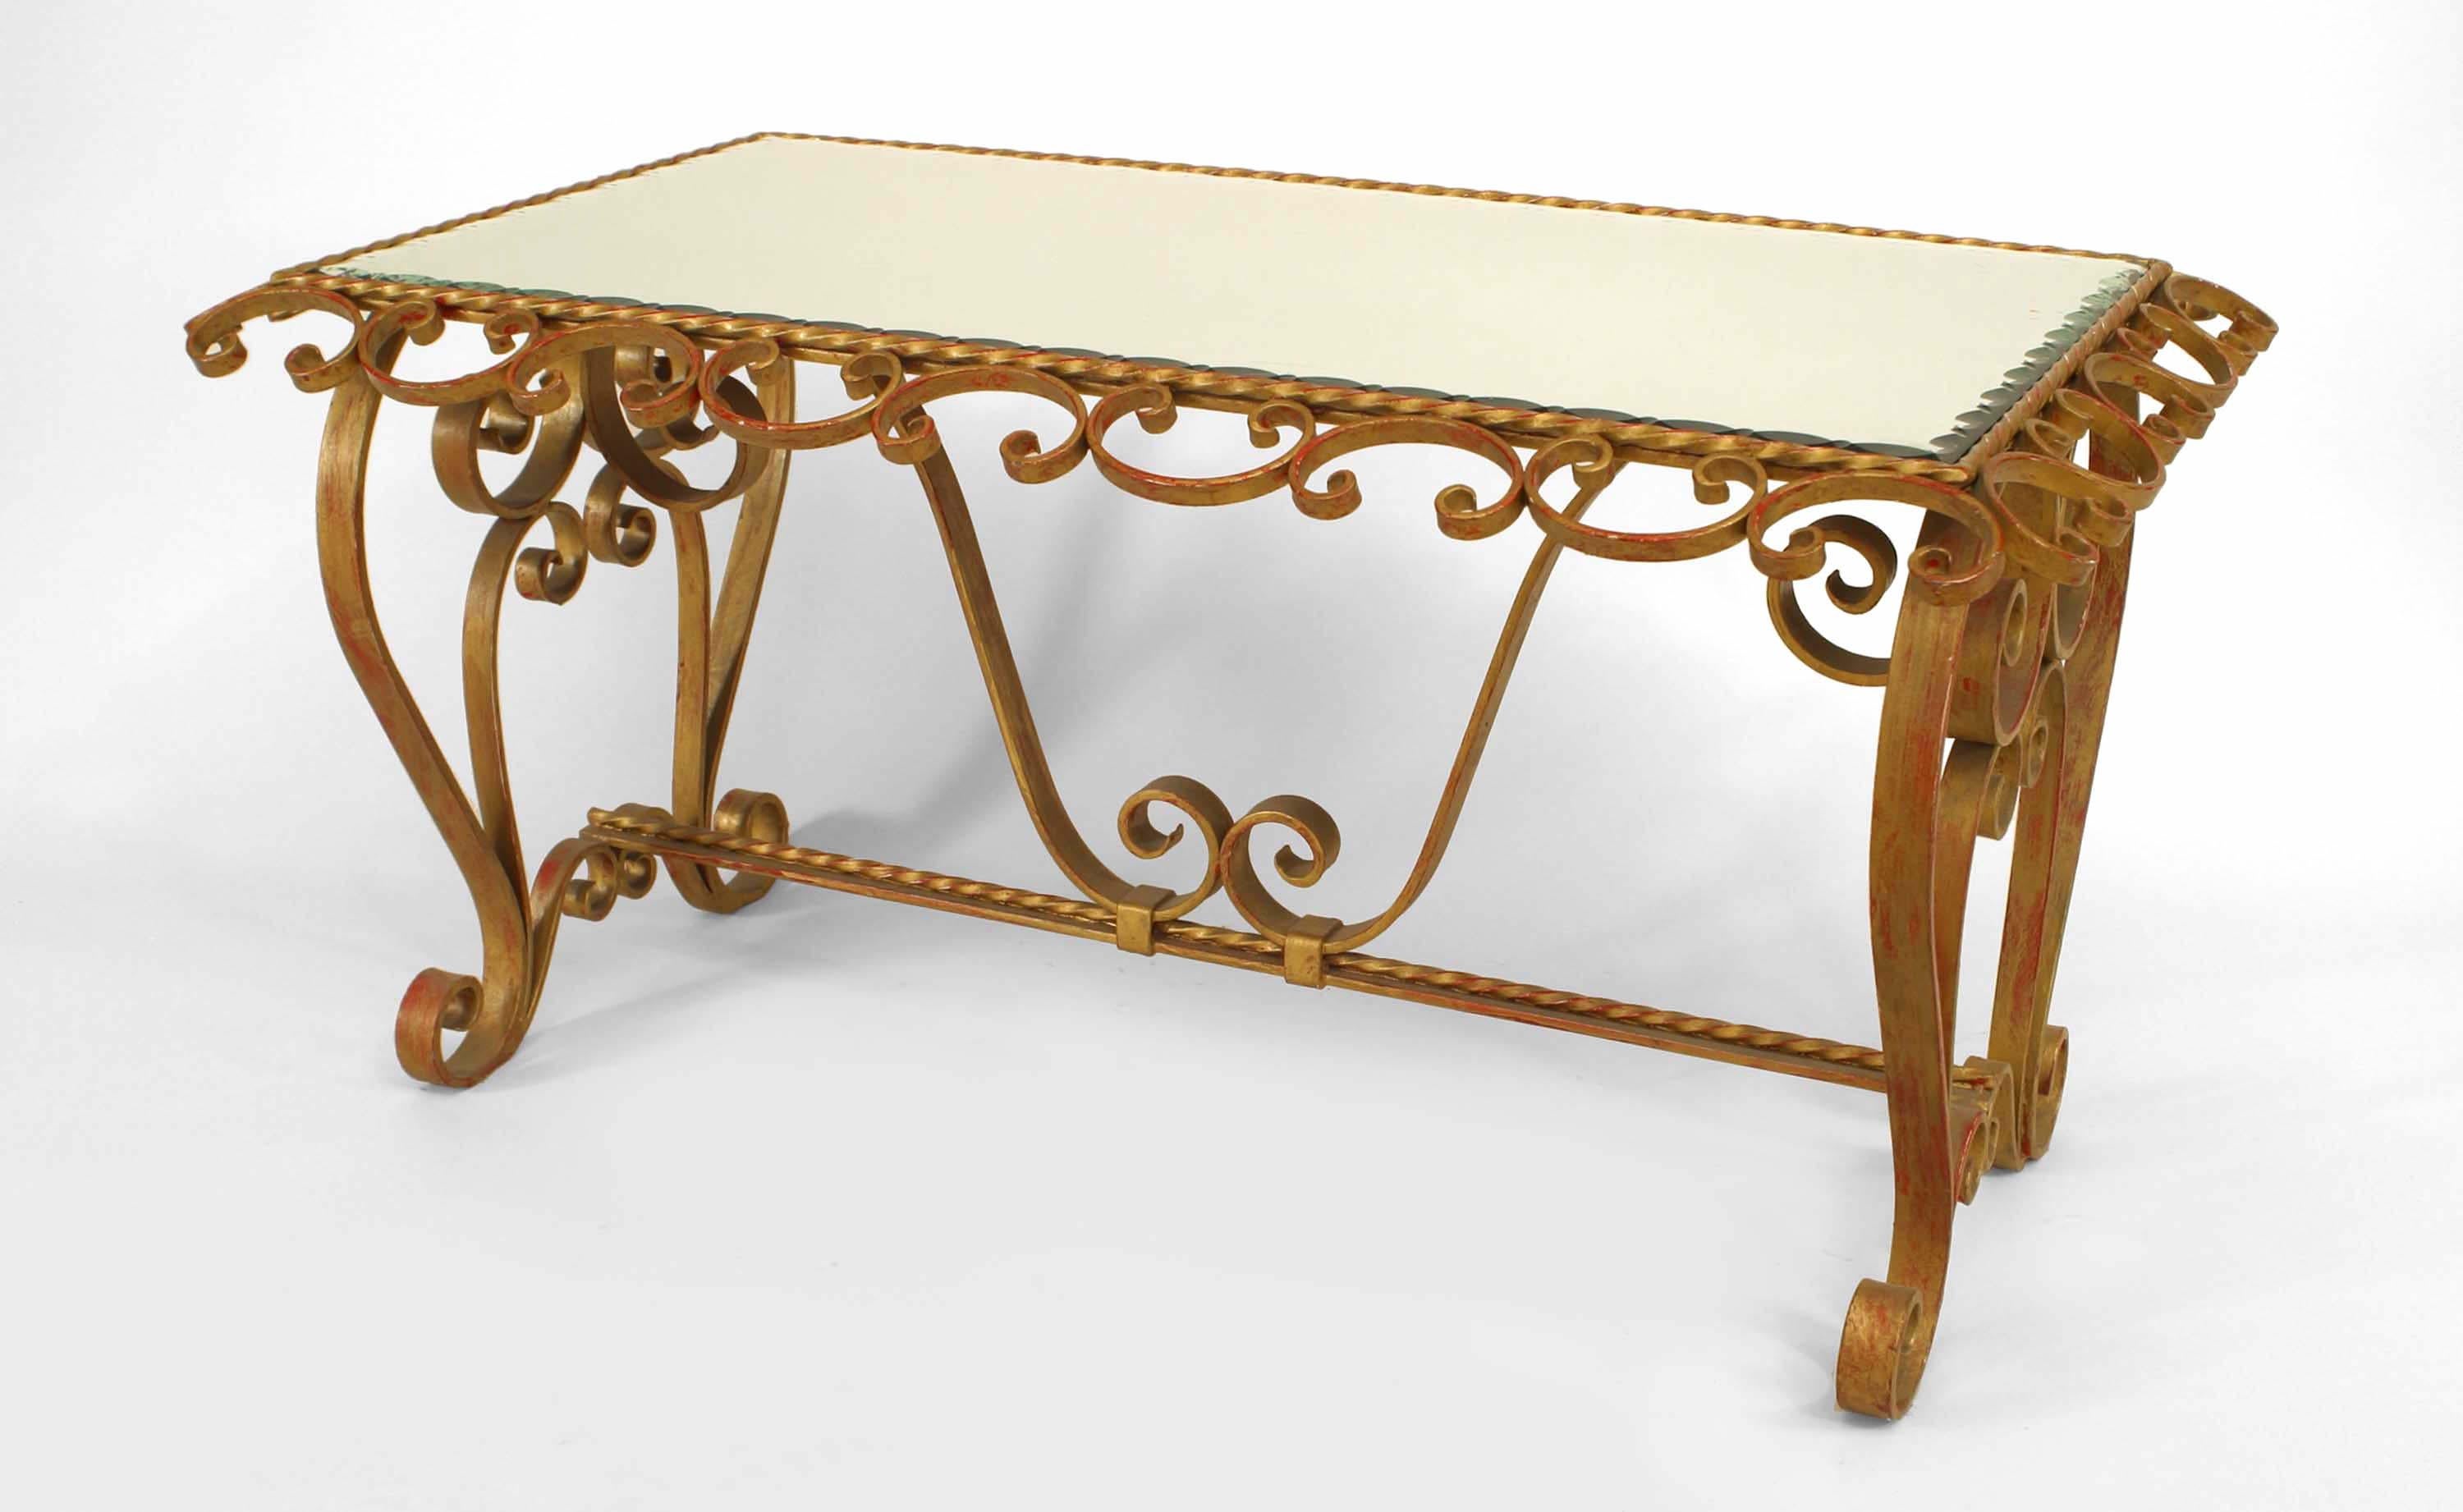 French Art Moderne (1940s) gold painted wrought iron coffee table with scroll / twisted iron details and beveled trimmed edge mirror top.
